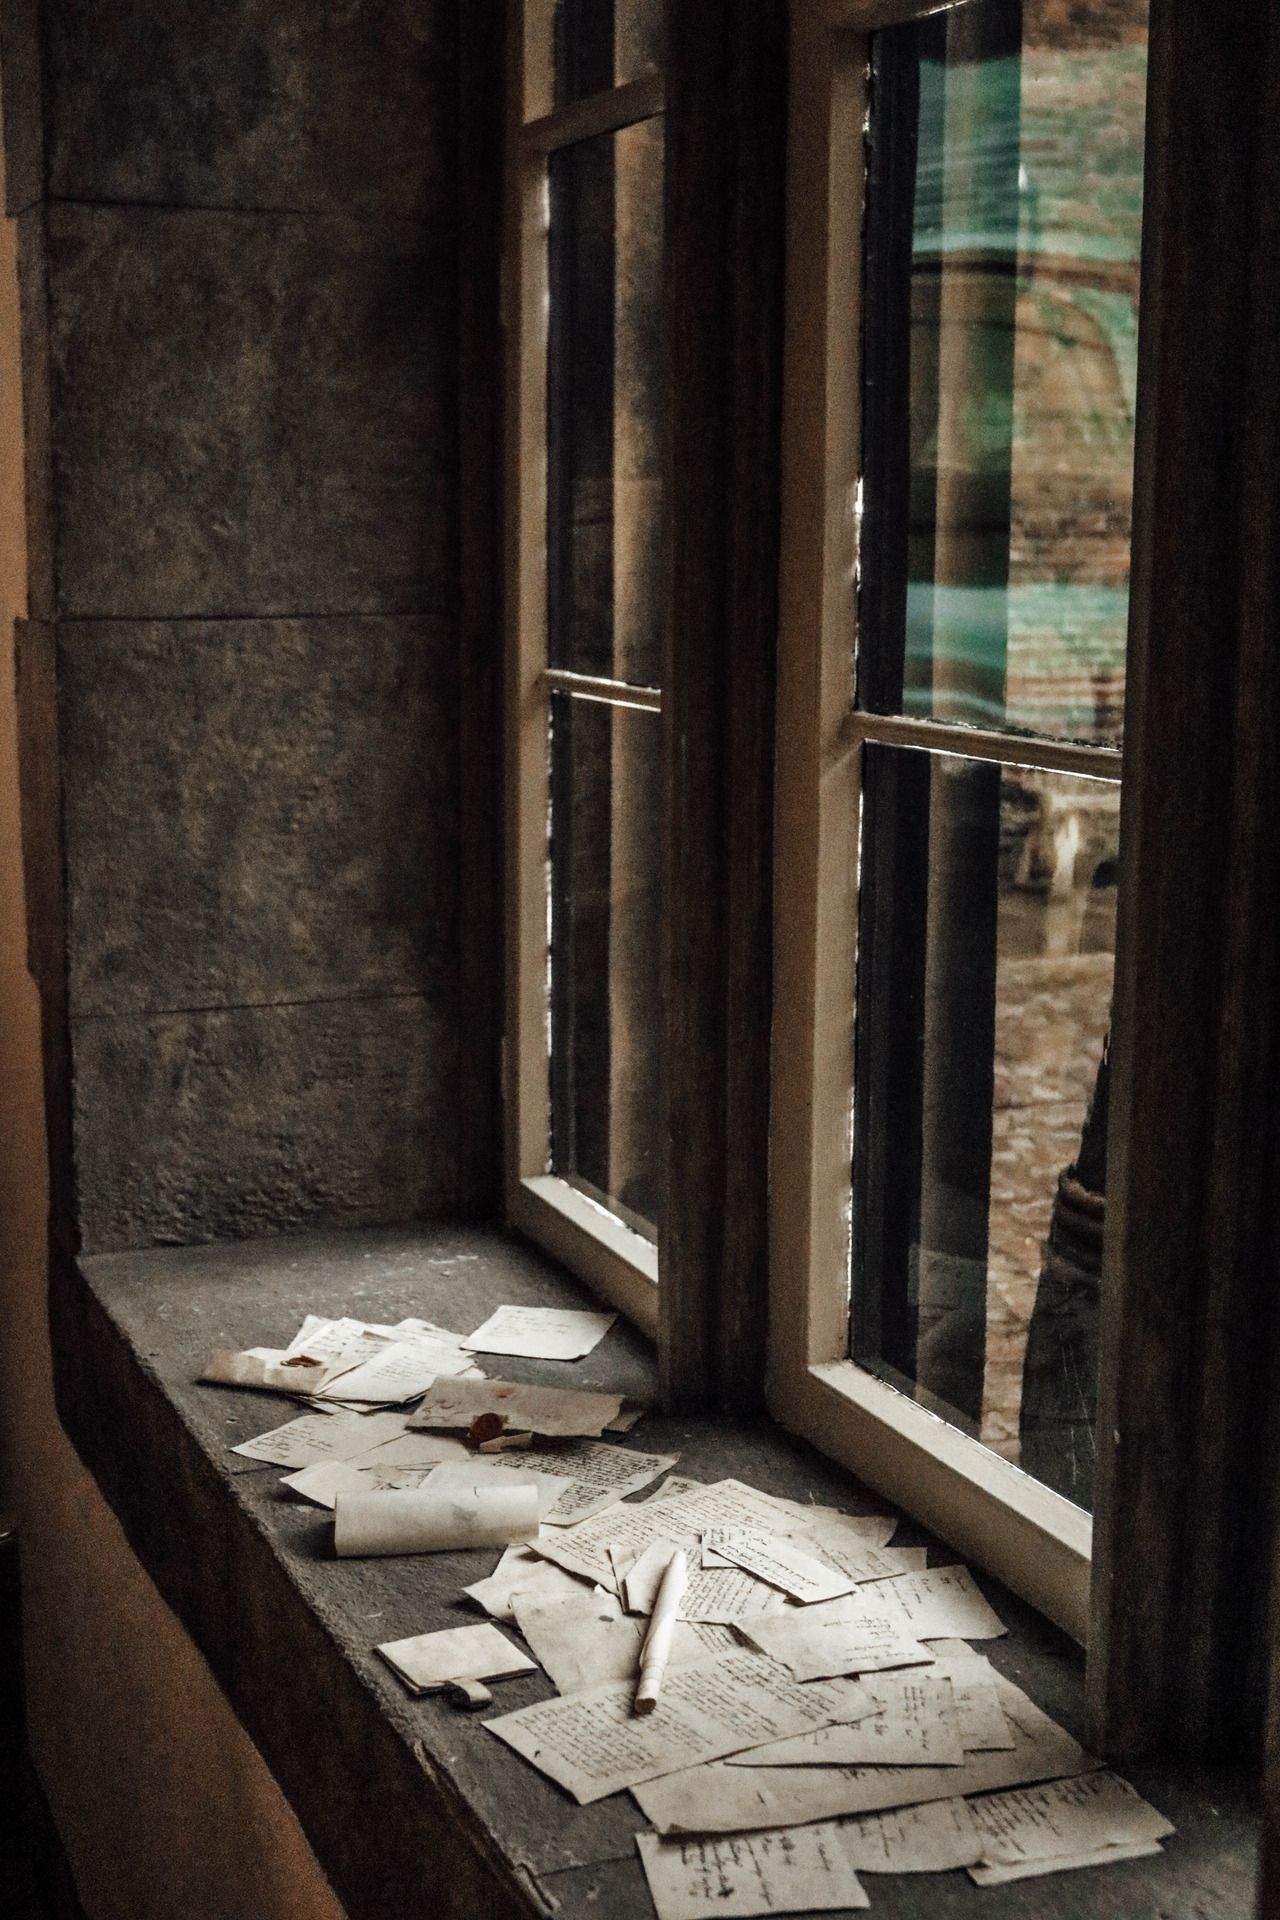 Sheets of paper are scattered on a windowsill. - Dark academia